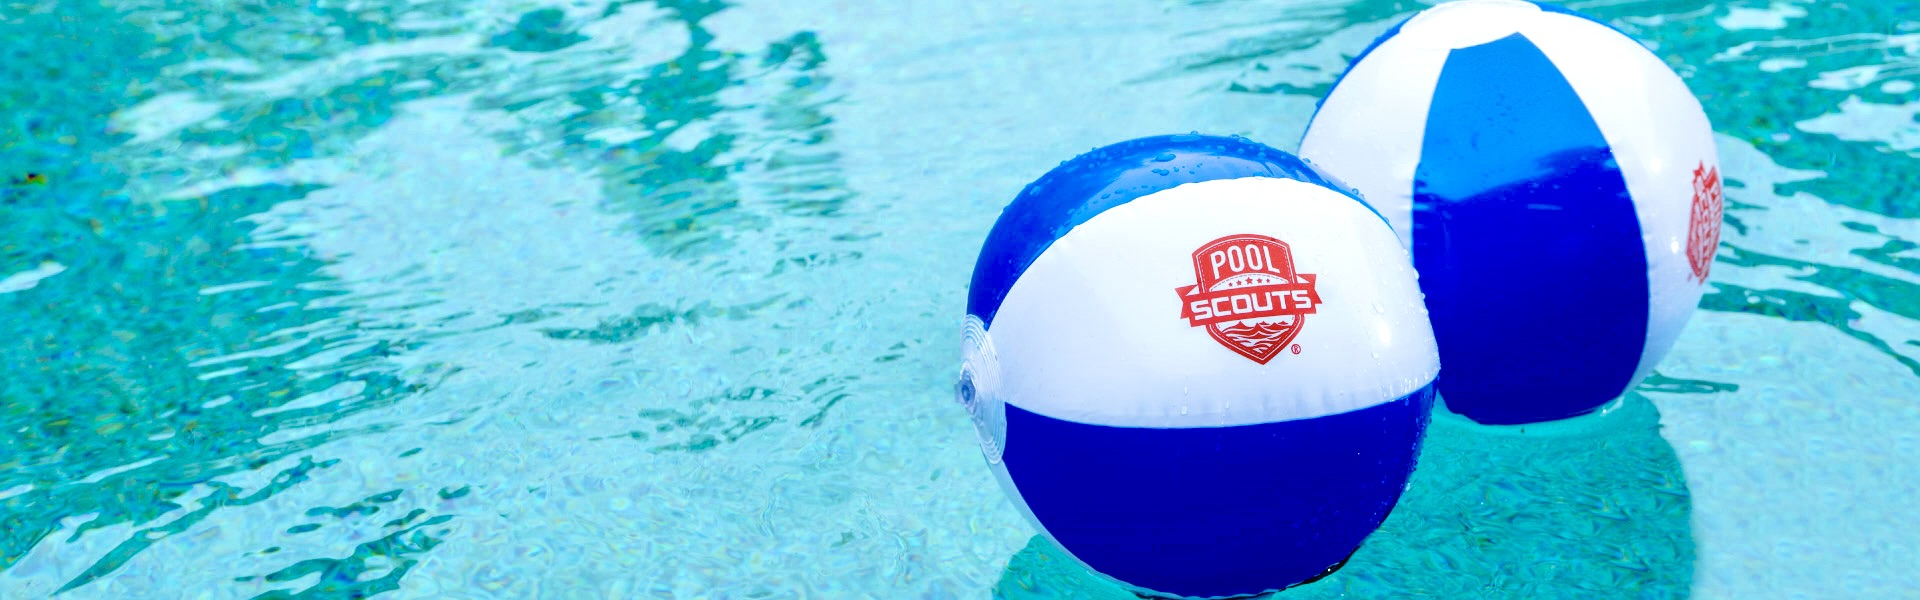 Inflatable Balls with Pool Scouts Logo in Clean Pool